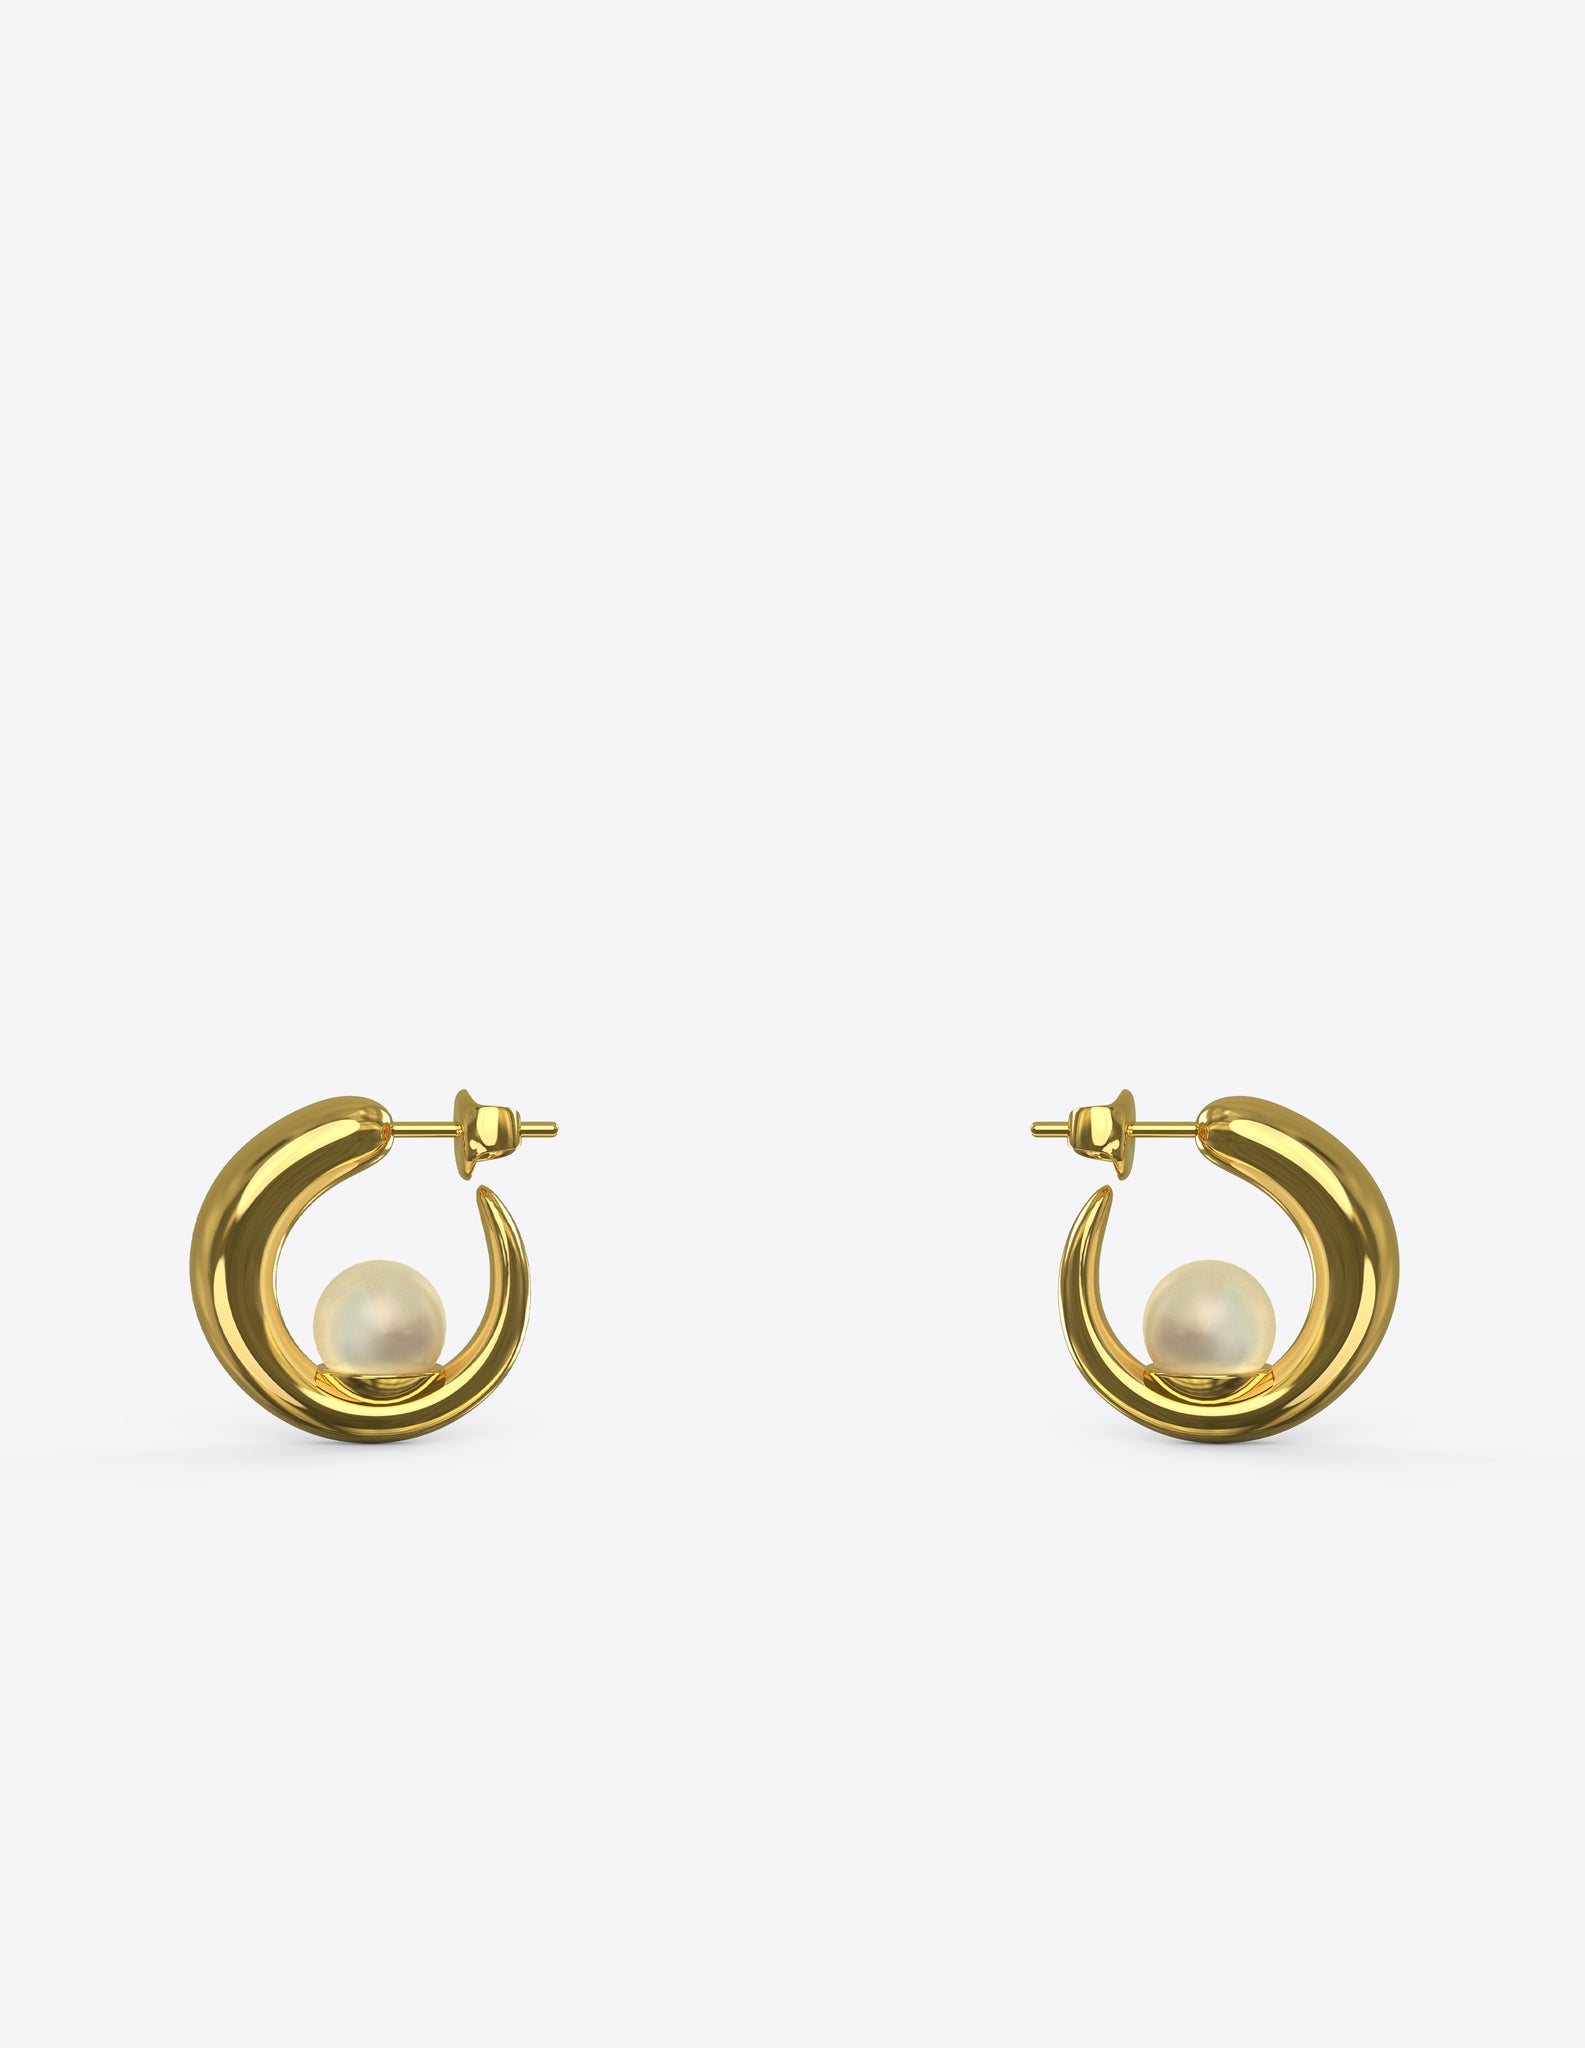 Tiny Isha Hoops in Polished Gold Vermeil with Pearl